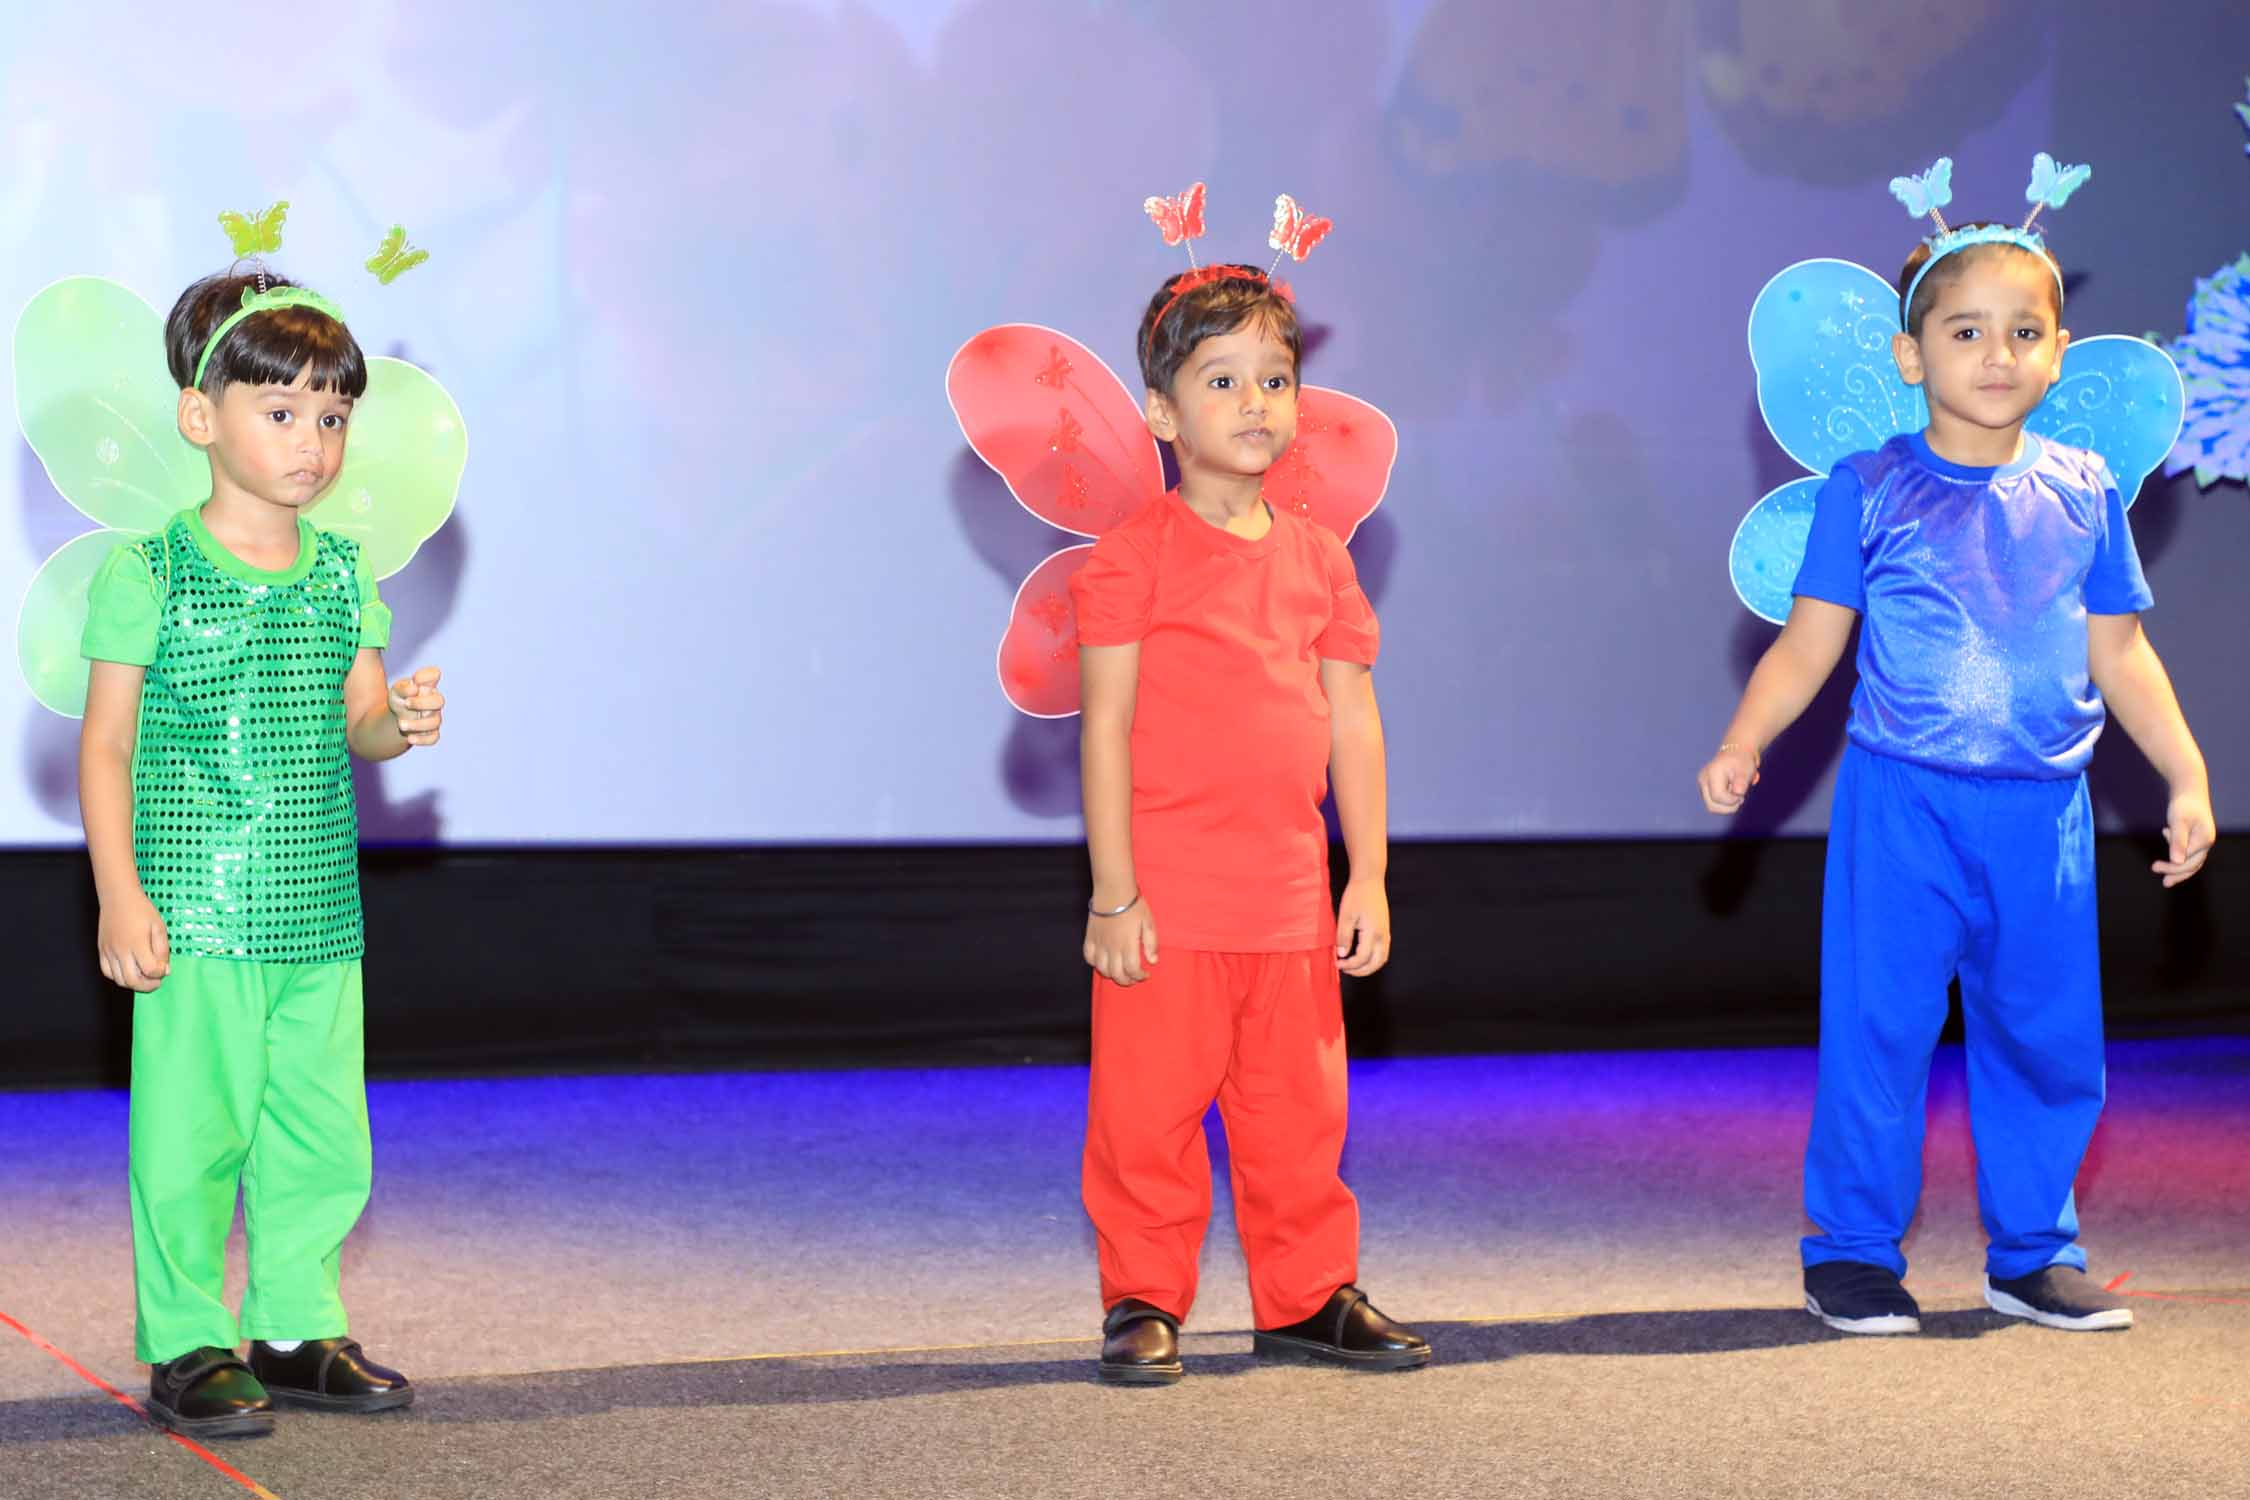 Creative Dance Performance by kids on stage